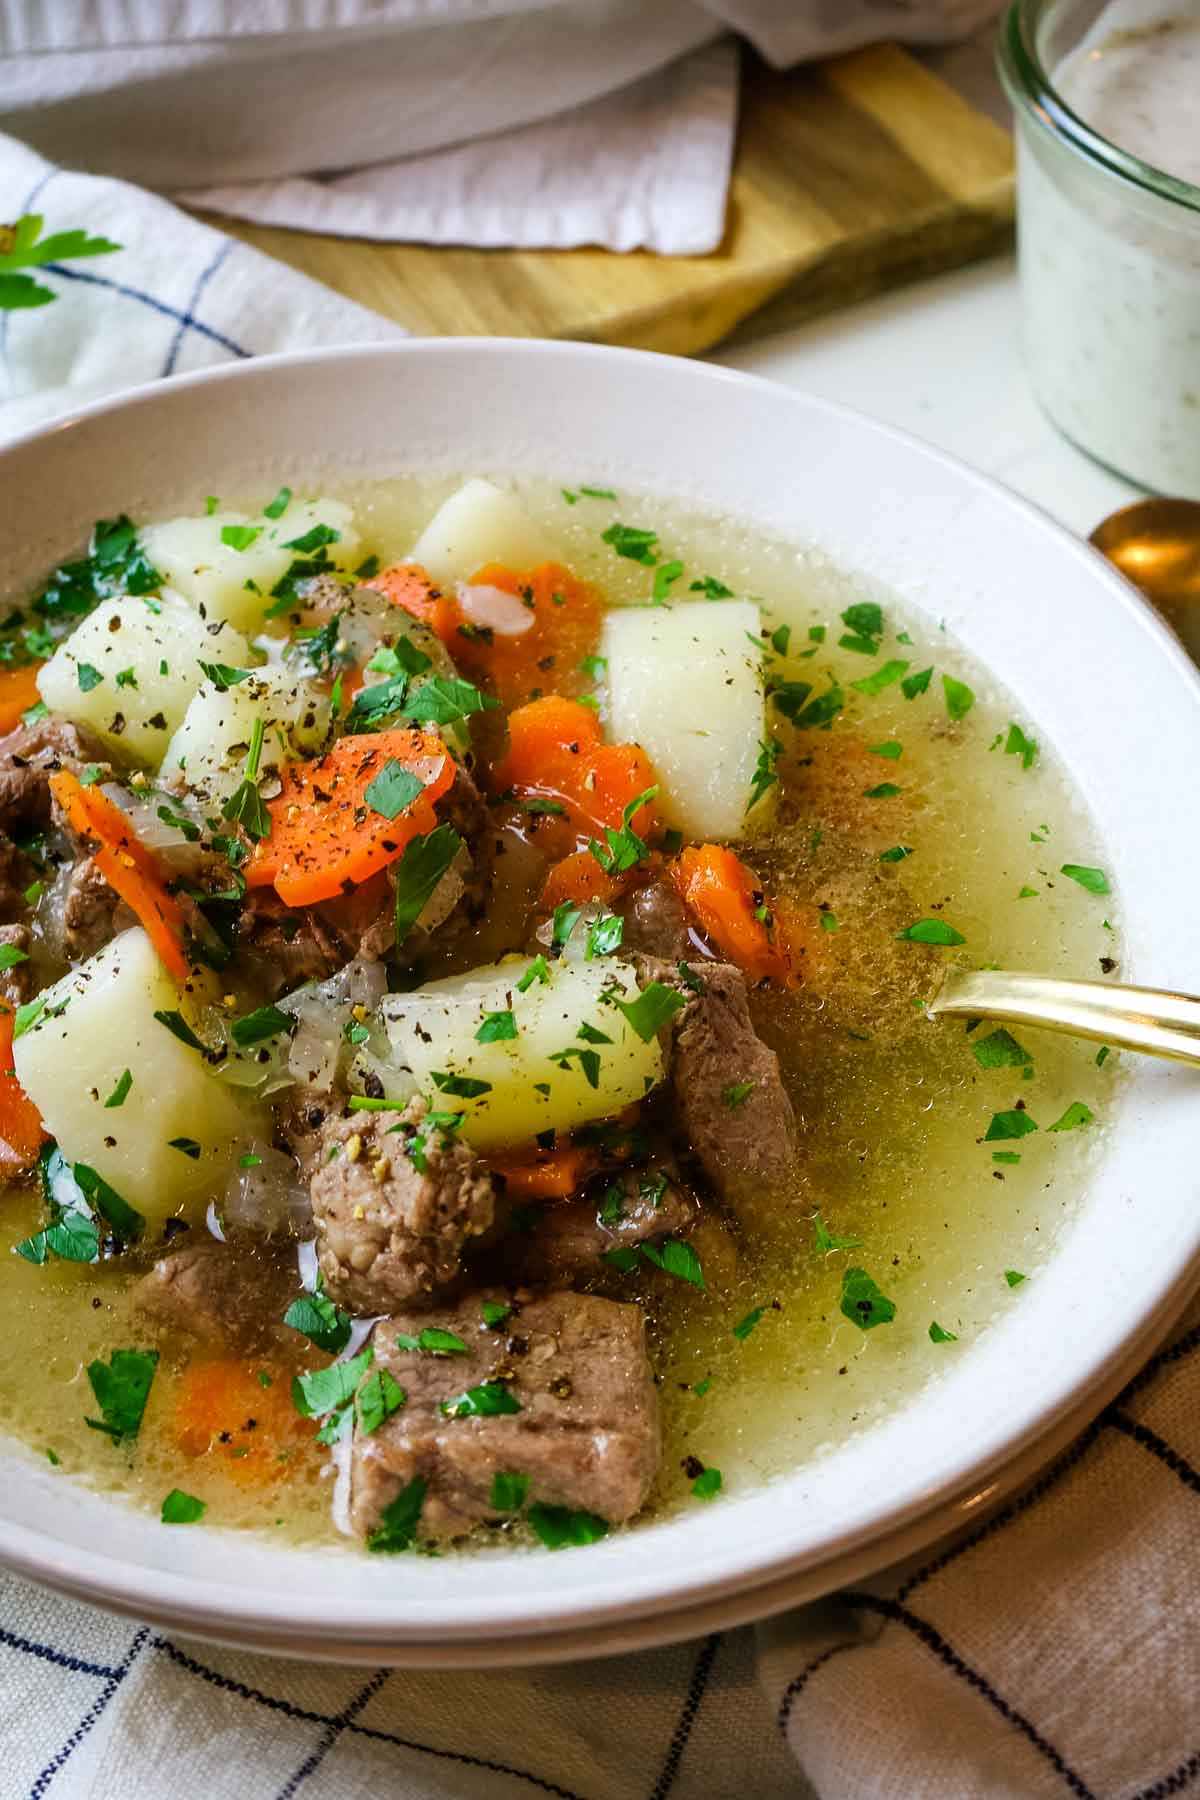 Shurpa soup upclose with lamb, potatoes, and carrots in white bowl.